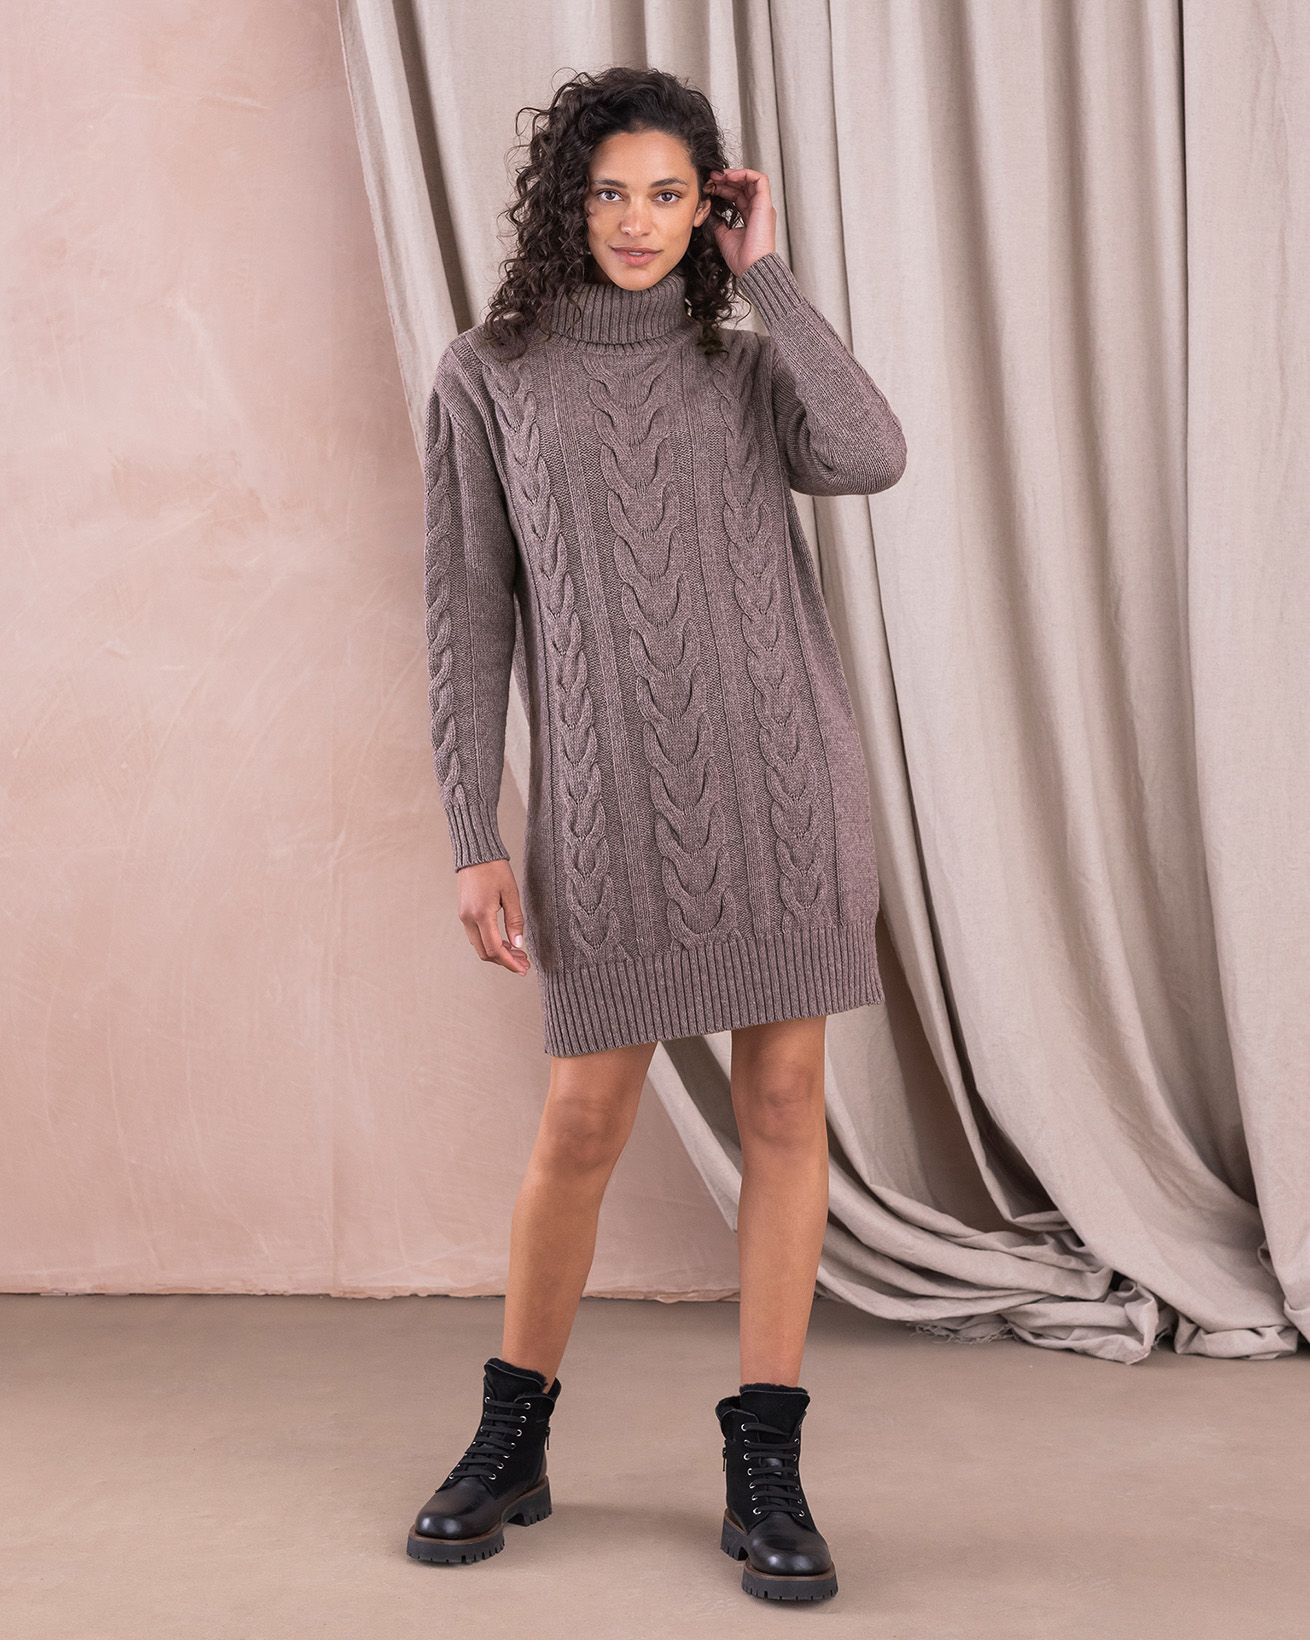 Lambswool/ Organic Cotton Cable Roll Neck Dress